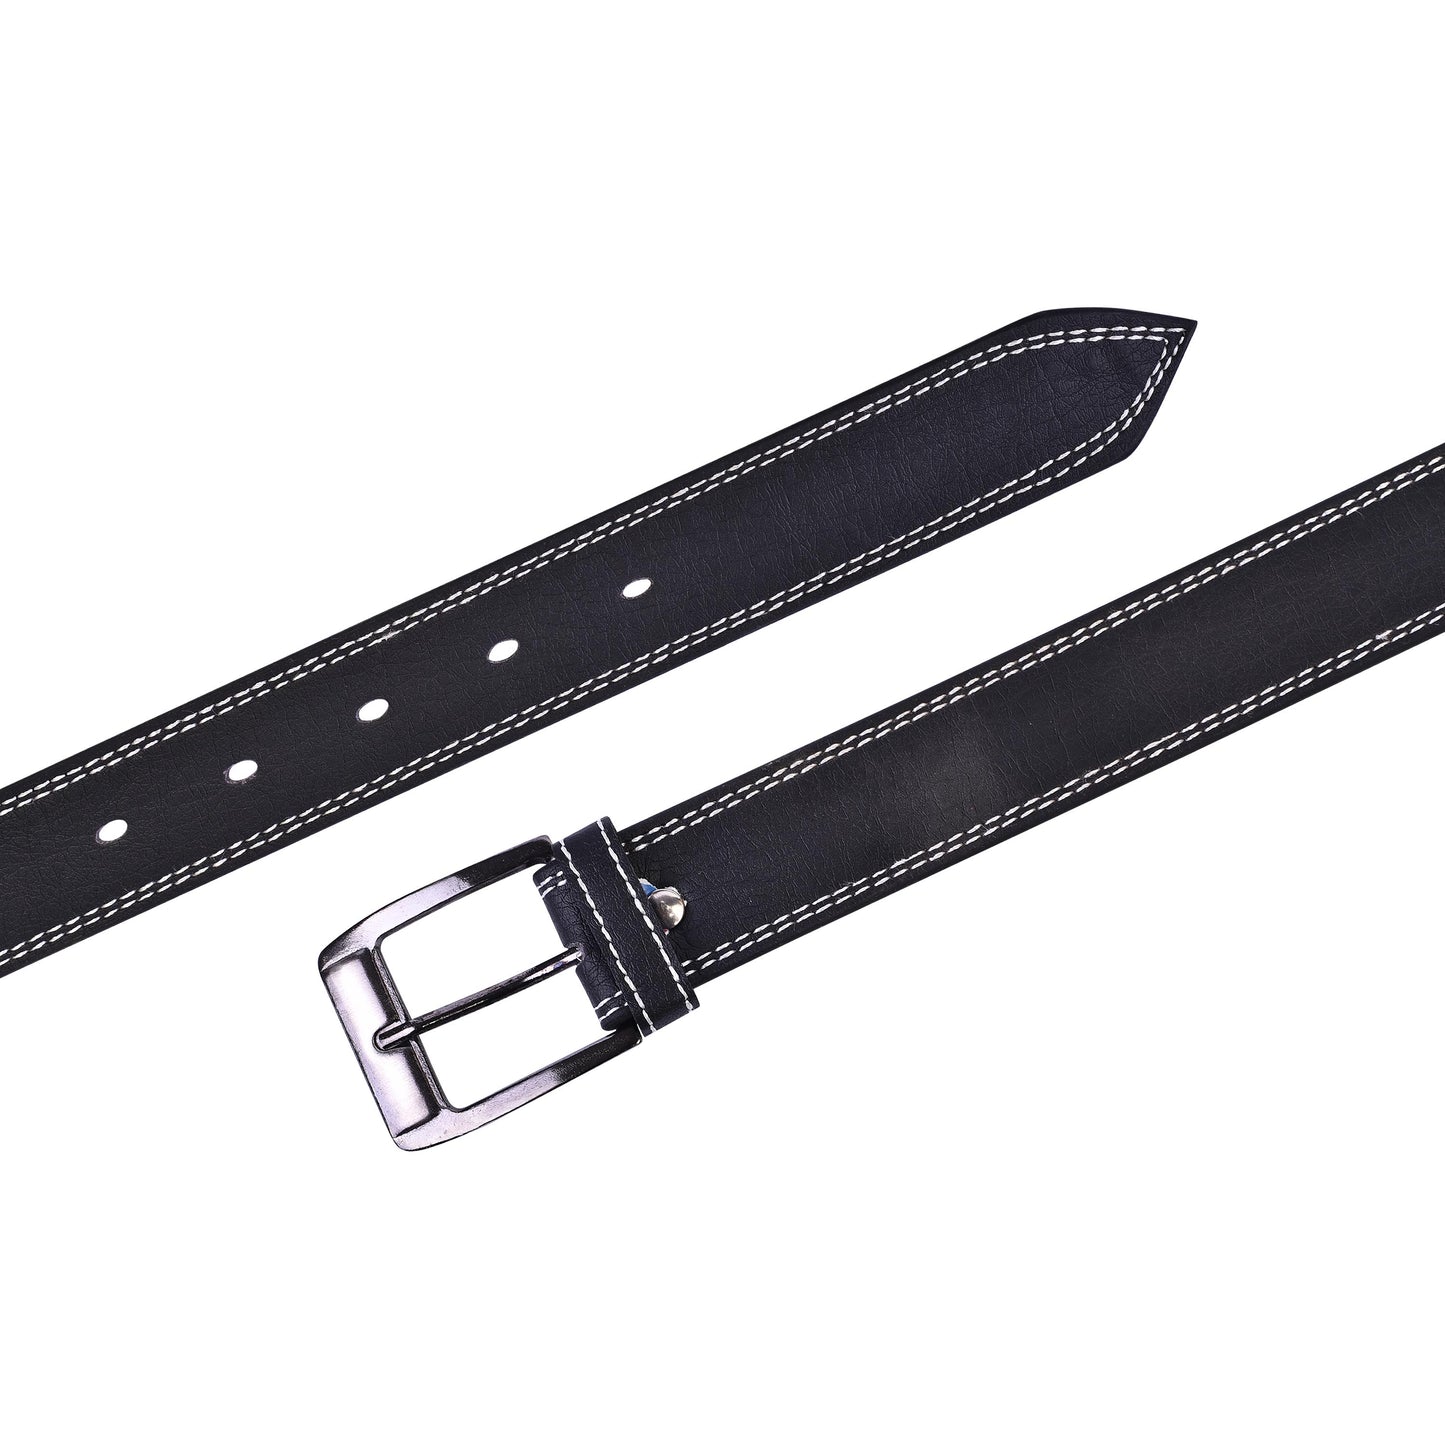 Men's Black casual Belt with white stitching